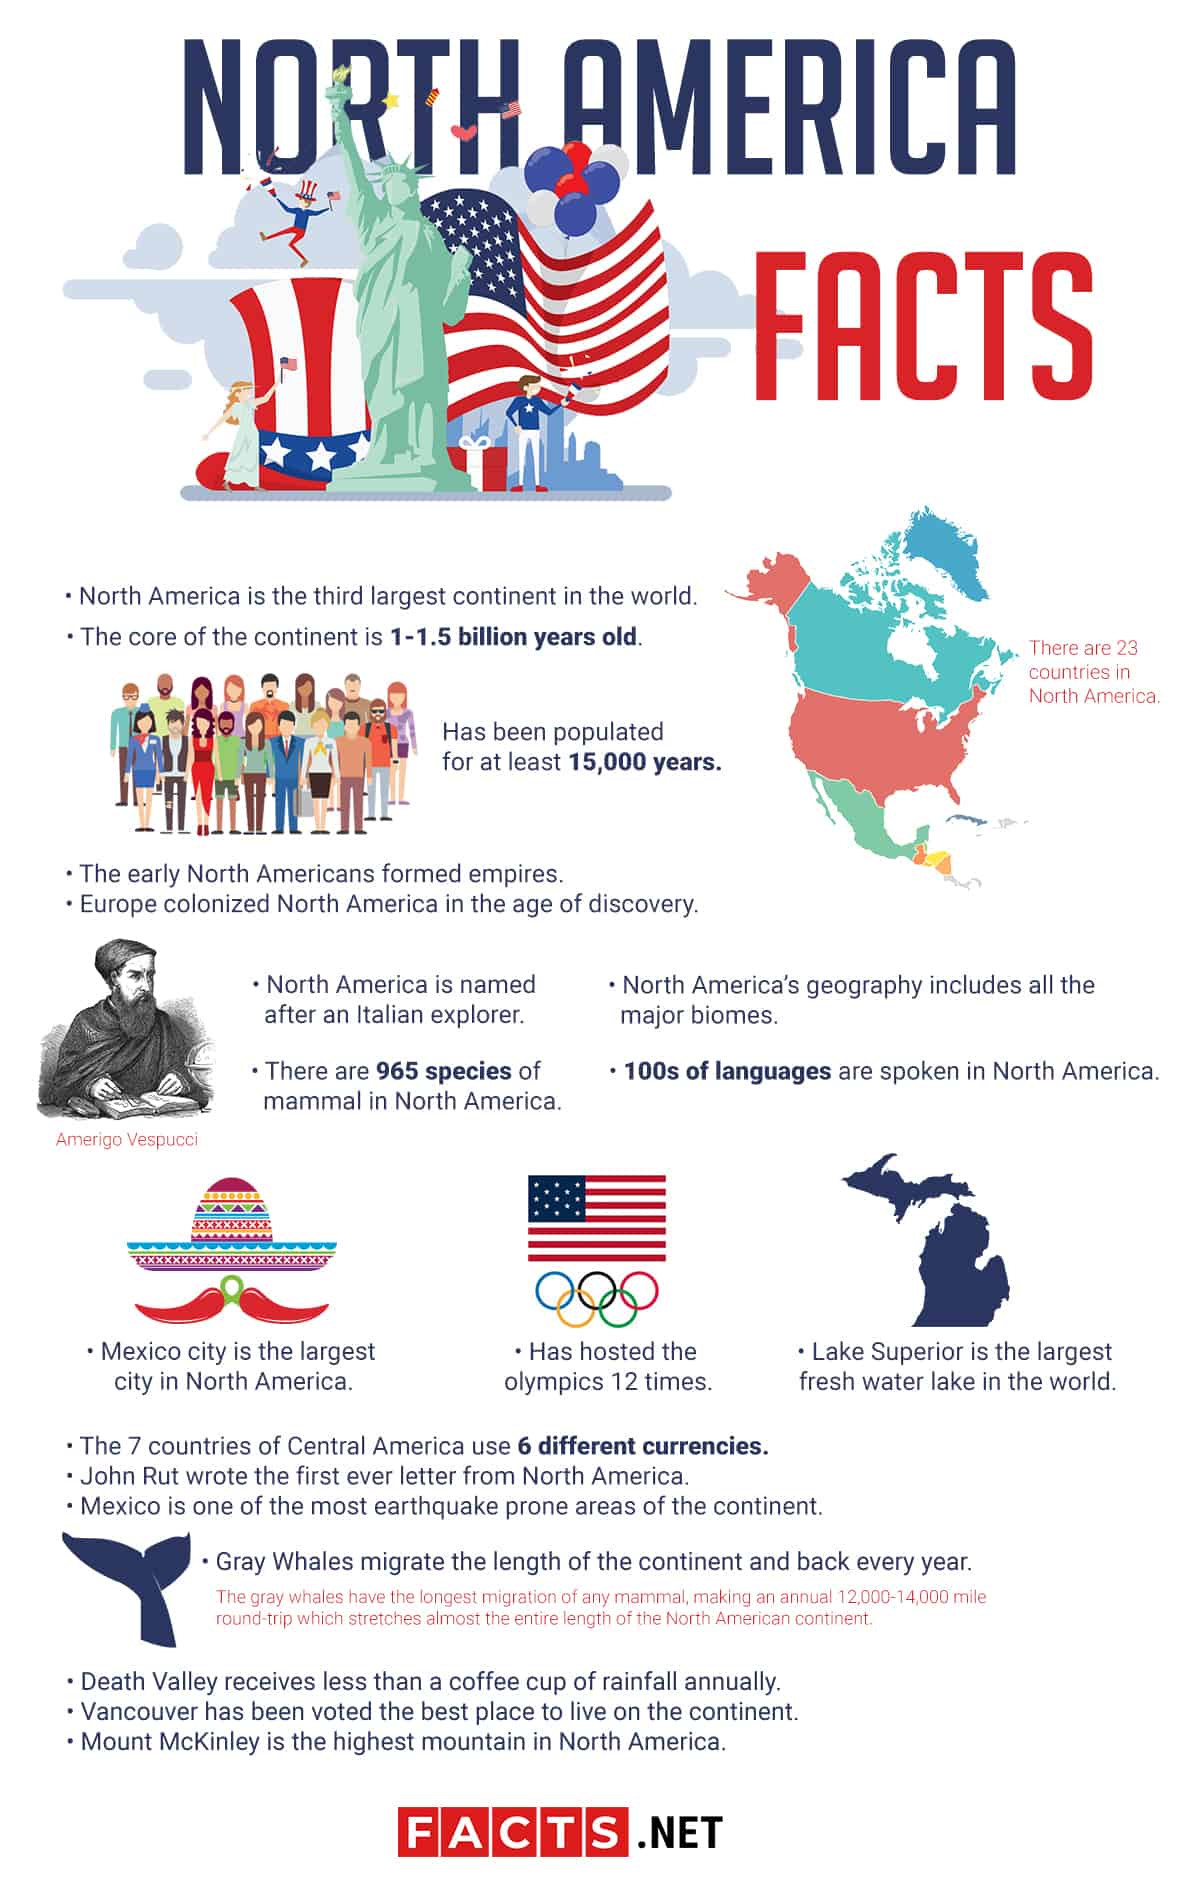 15 Facts About the USA - Have Fun With History